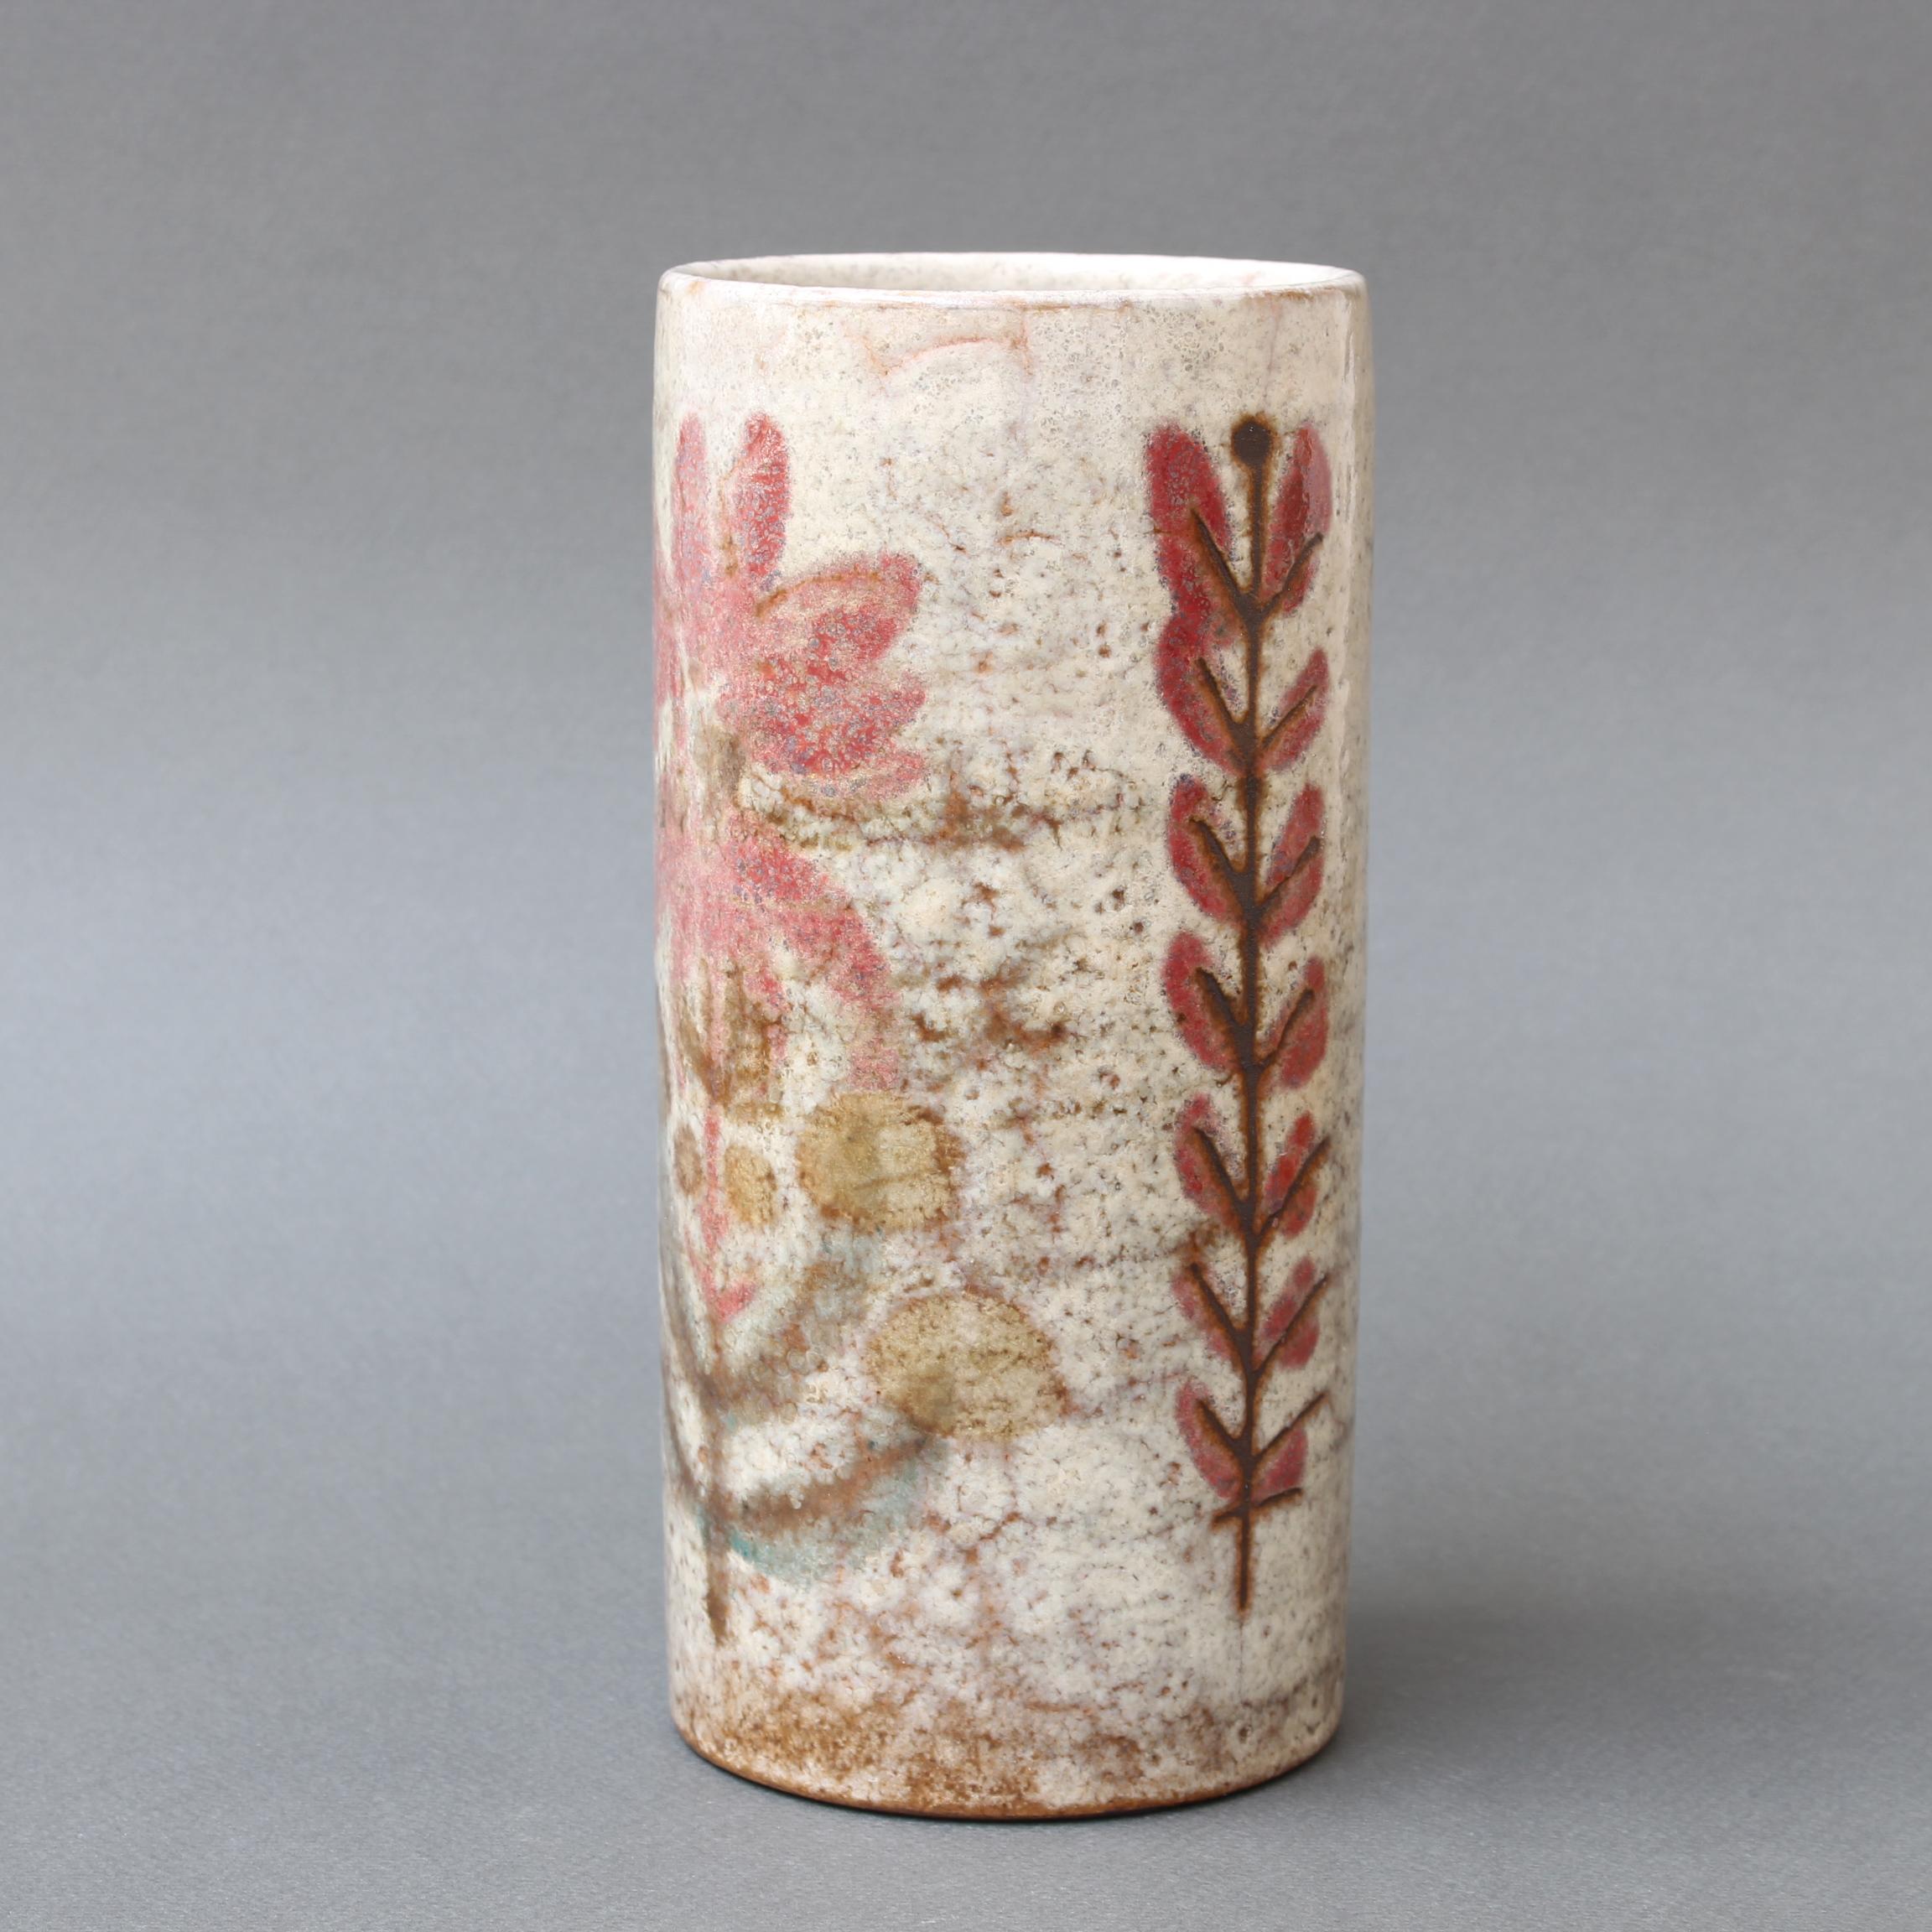 Vintage French ceramic flower vase by Le Mûrier (circa 1960s). A charming cylindrical vase in the unmistakable Le Mûrier Provençal style with their trademark stylised mulberry flower and upright leaf motif. The underlying glaze is a hazy off-white,